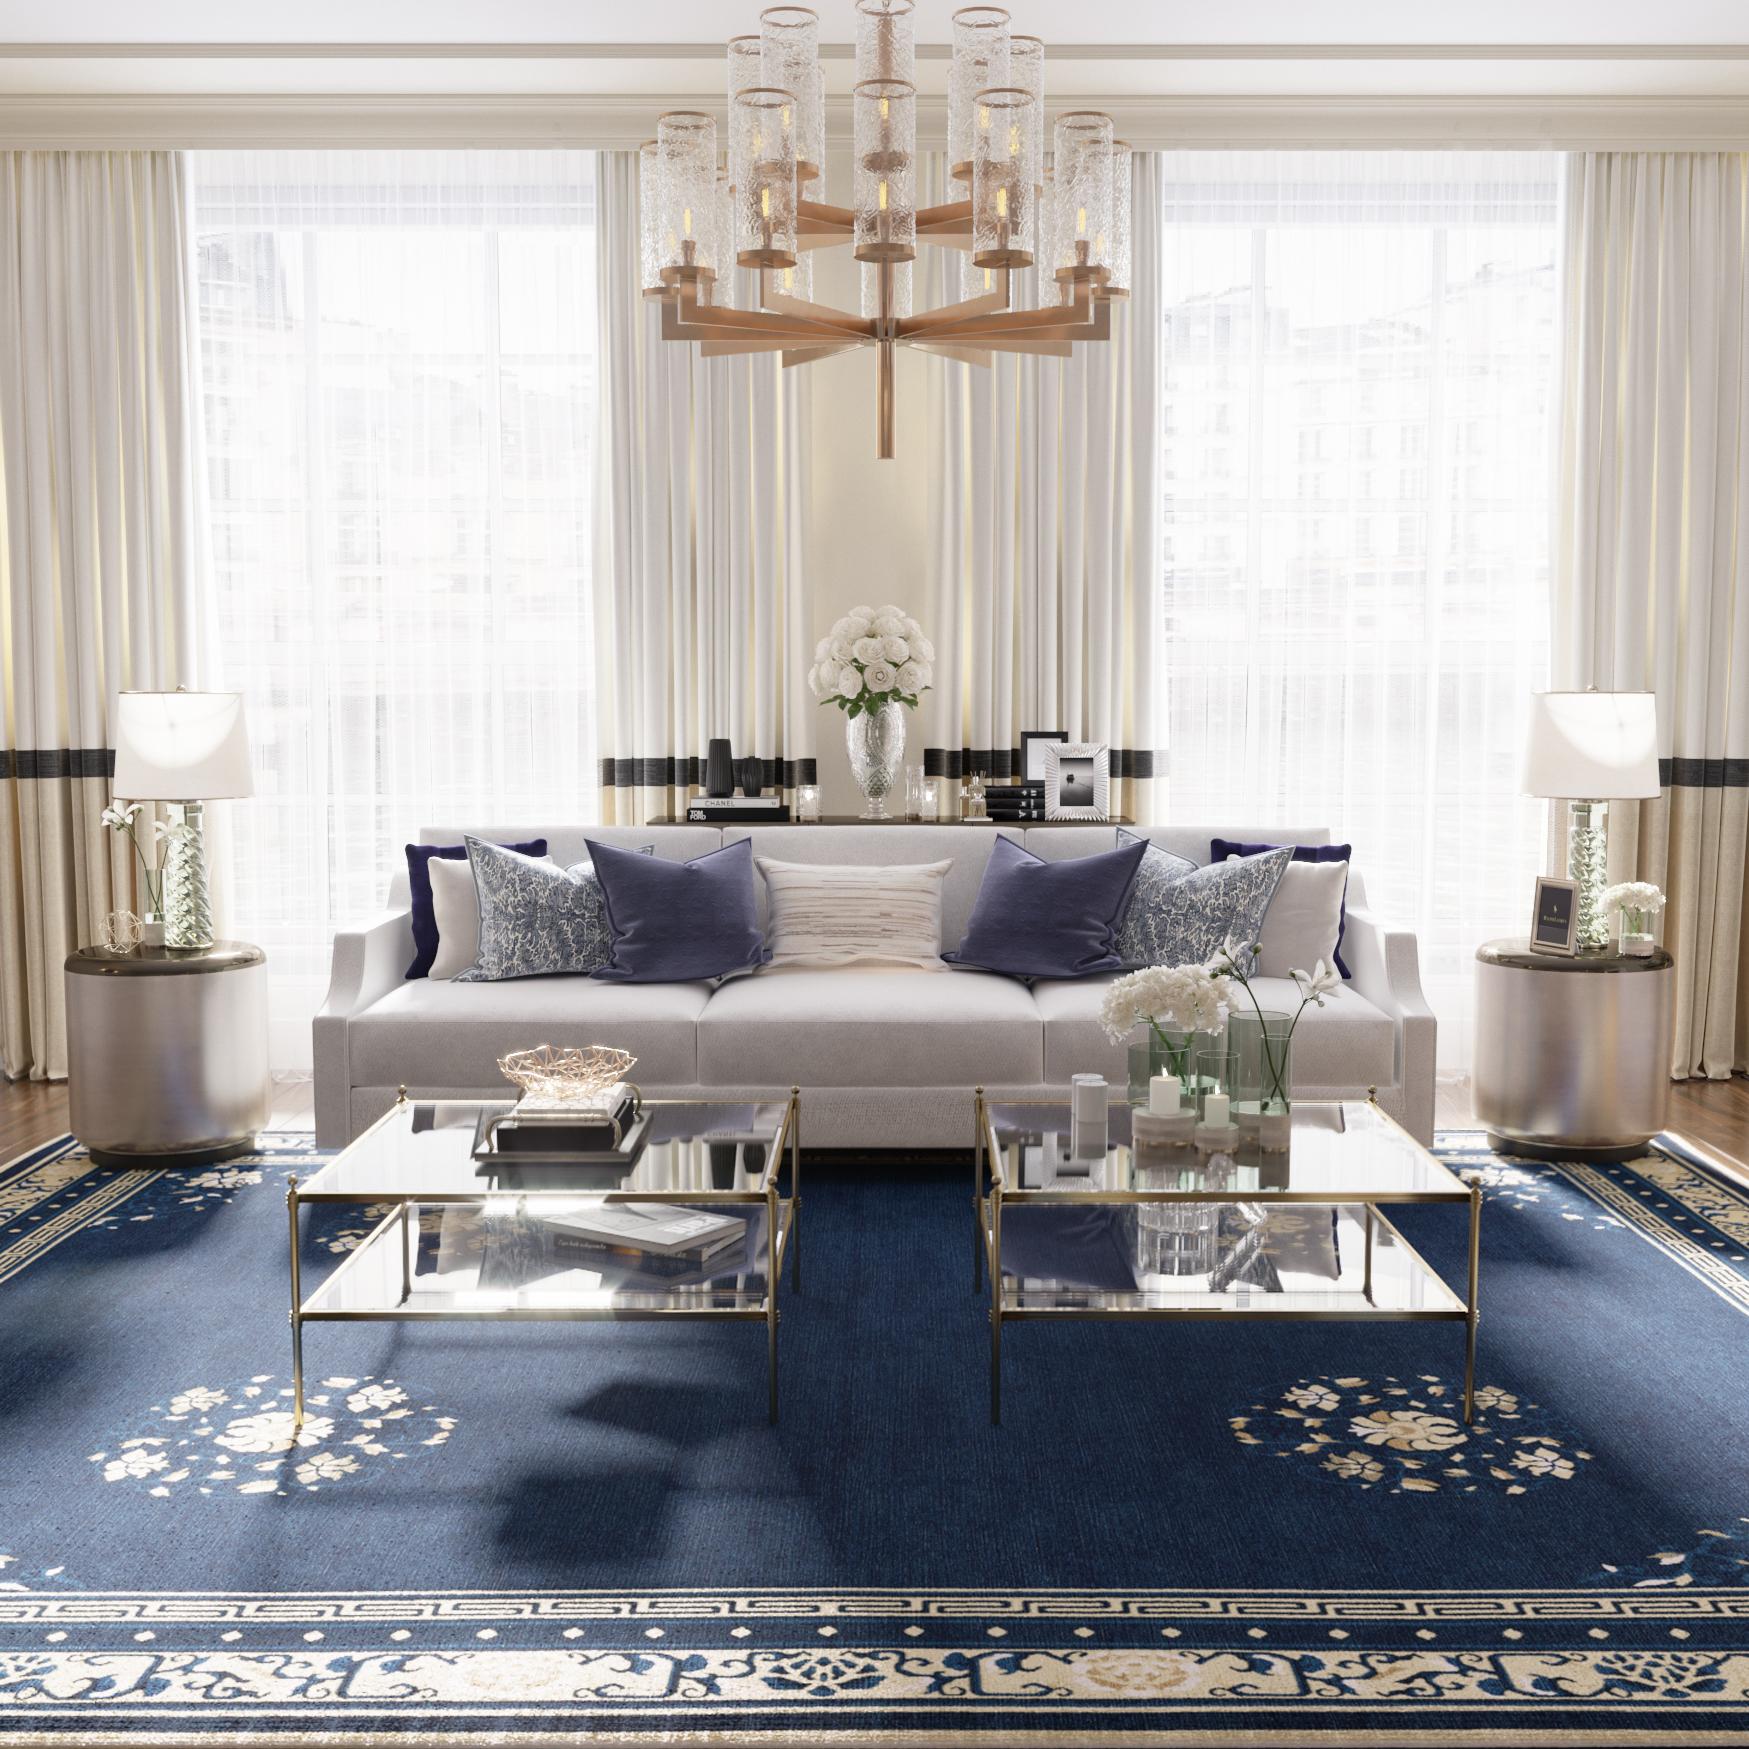 The Chinoiserie collection is inspired by ancient graphics and illustrations of Chinese origin, adapted to fuse seamlessly with a contemporary interior and is made up of Fine works of art handcrafted from exquisite silk yarns. The Floating Lotus rug